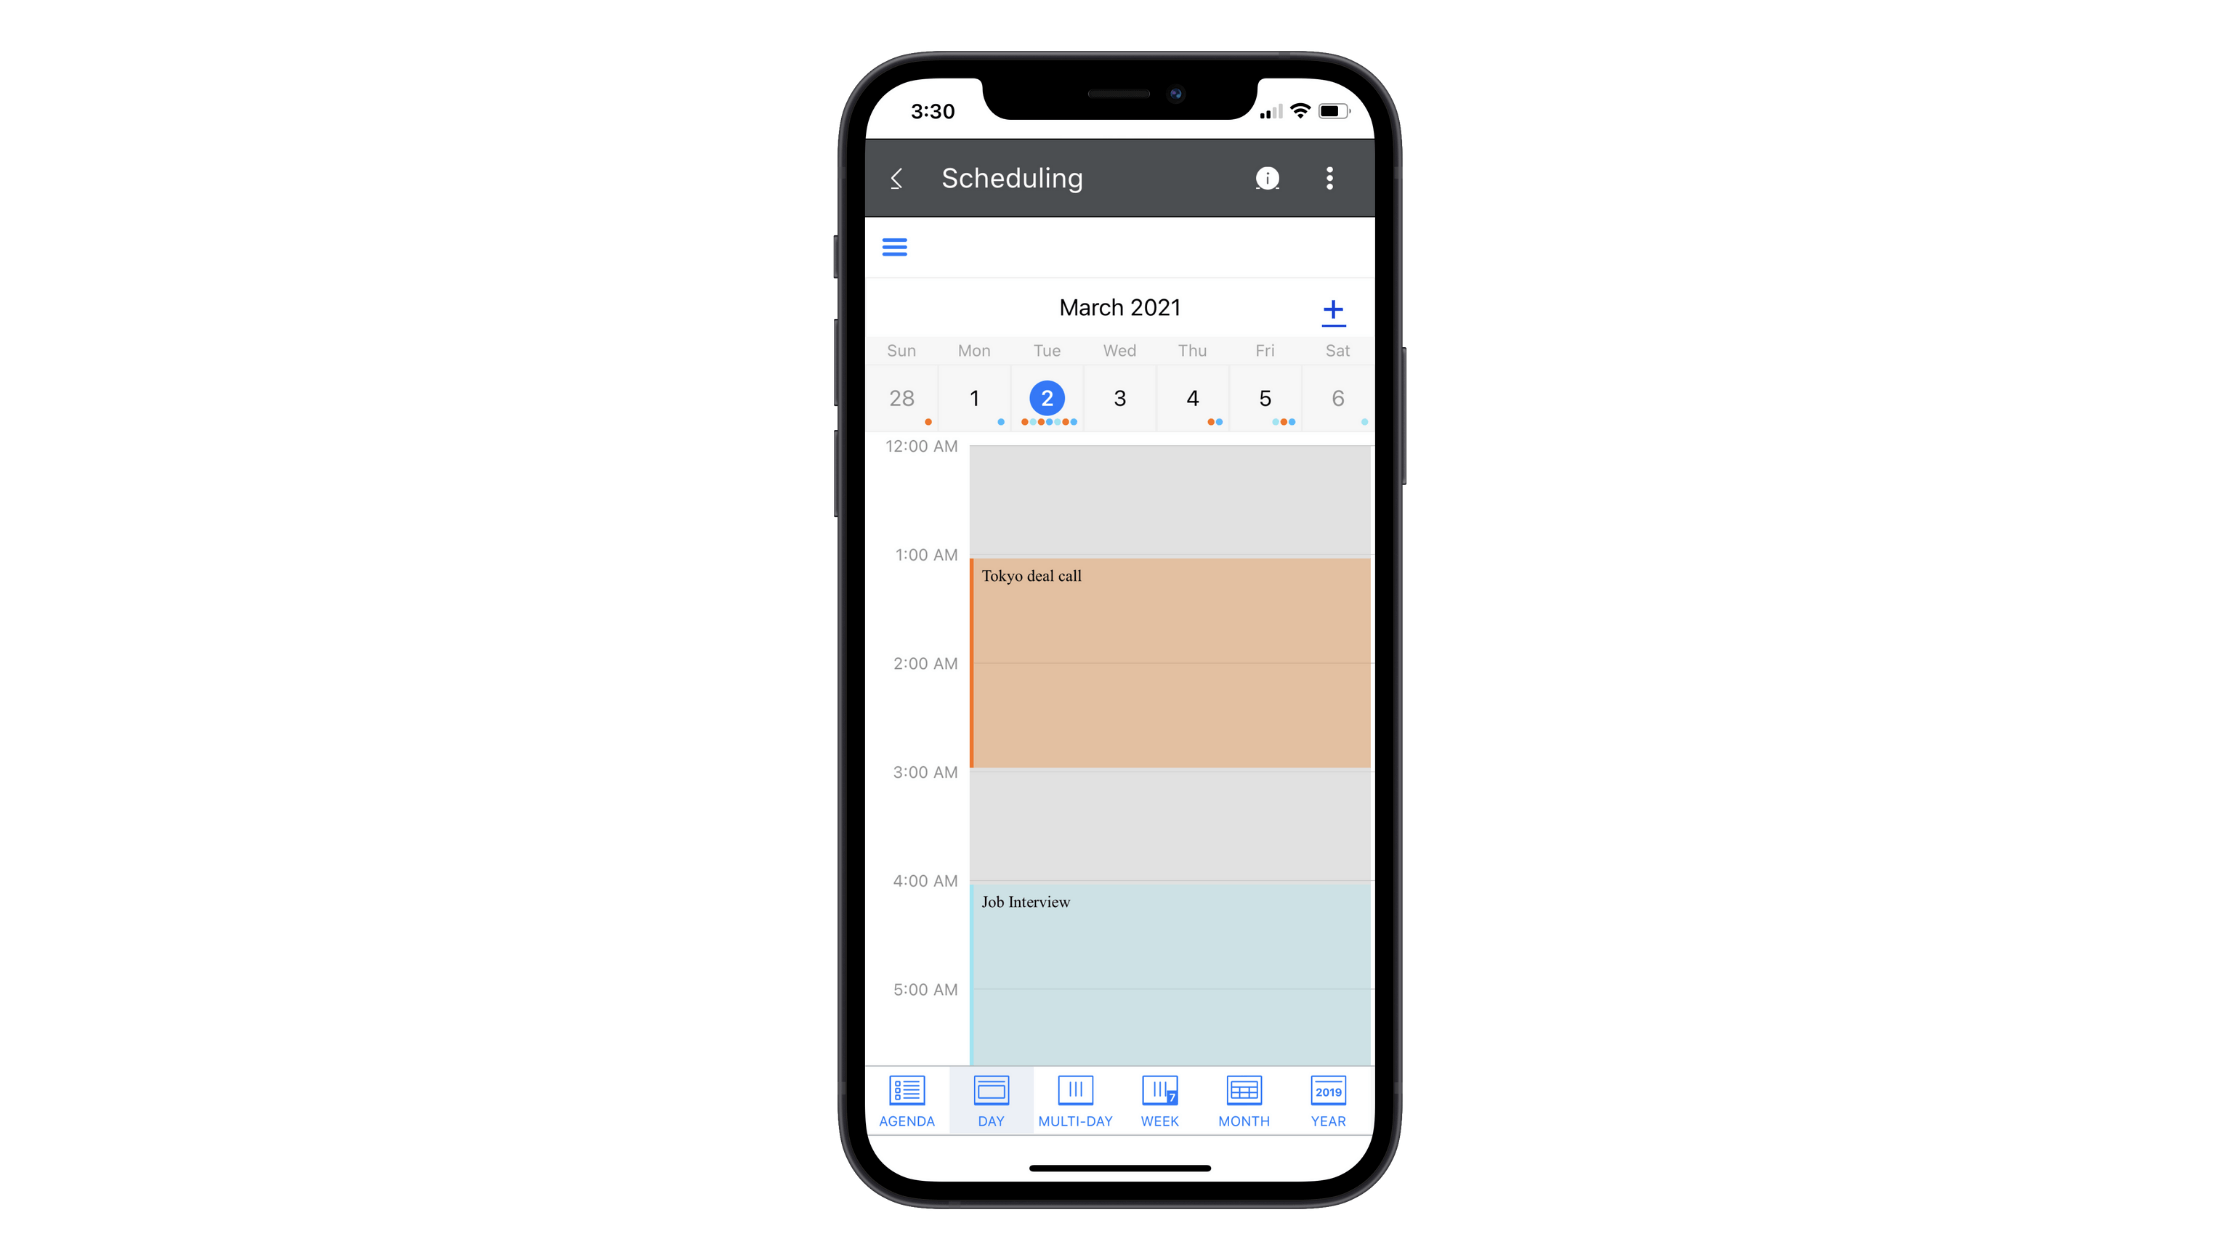 This scheduling component is part of the Telerik UI for Xamarin library. In this example, we see what a schedule for March 2021 looks like in the Day view.